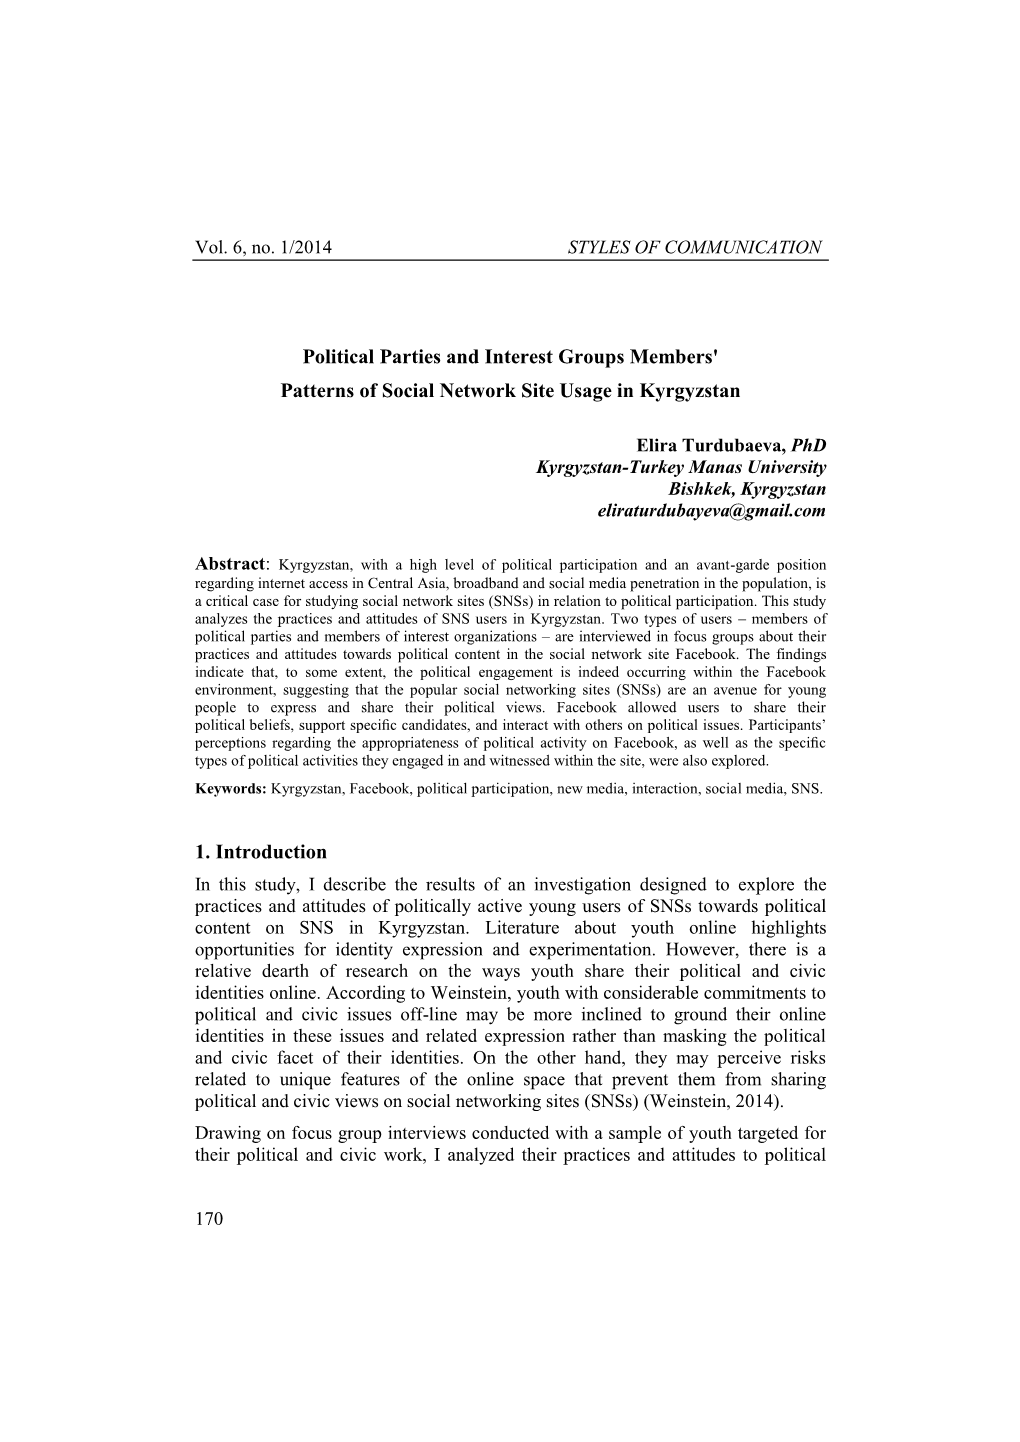 Political Parties and Interest Groups Members' Patterns of Social Network Site Usage in Kyrgyzstan